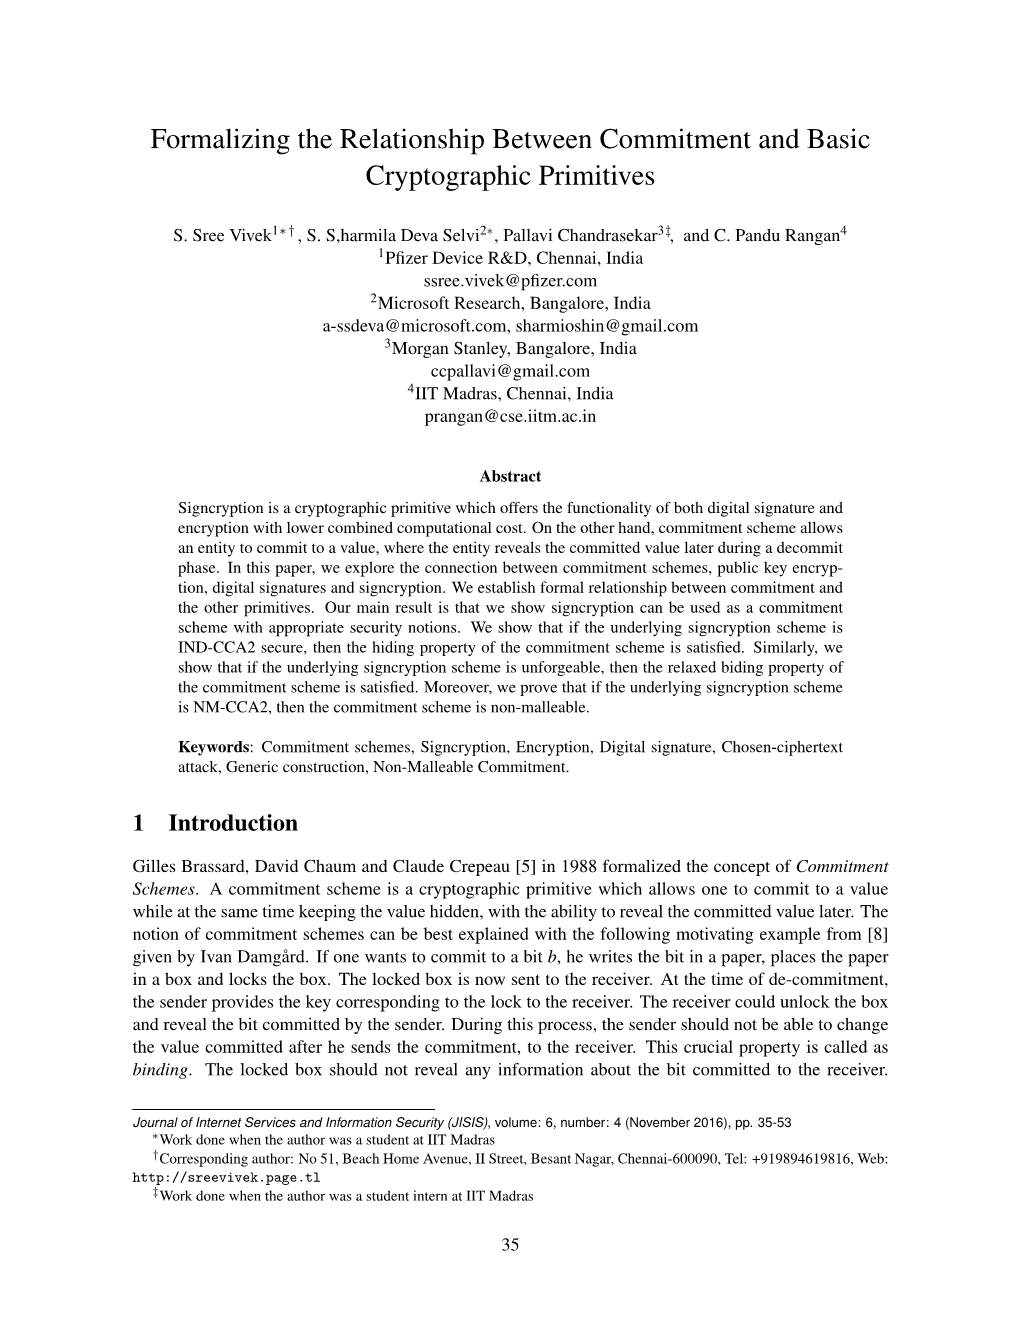 Formalizing the Relationship Between Commitment and Basic Cryptographic Primitives